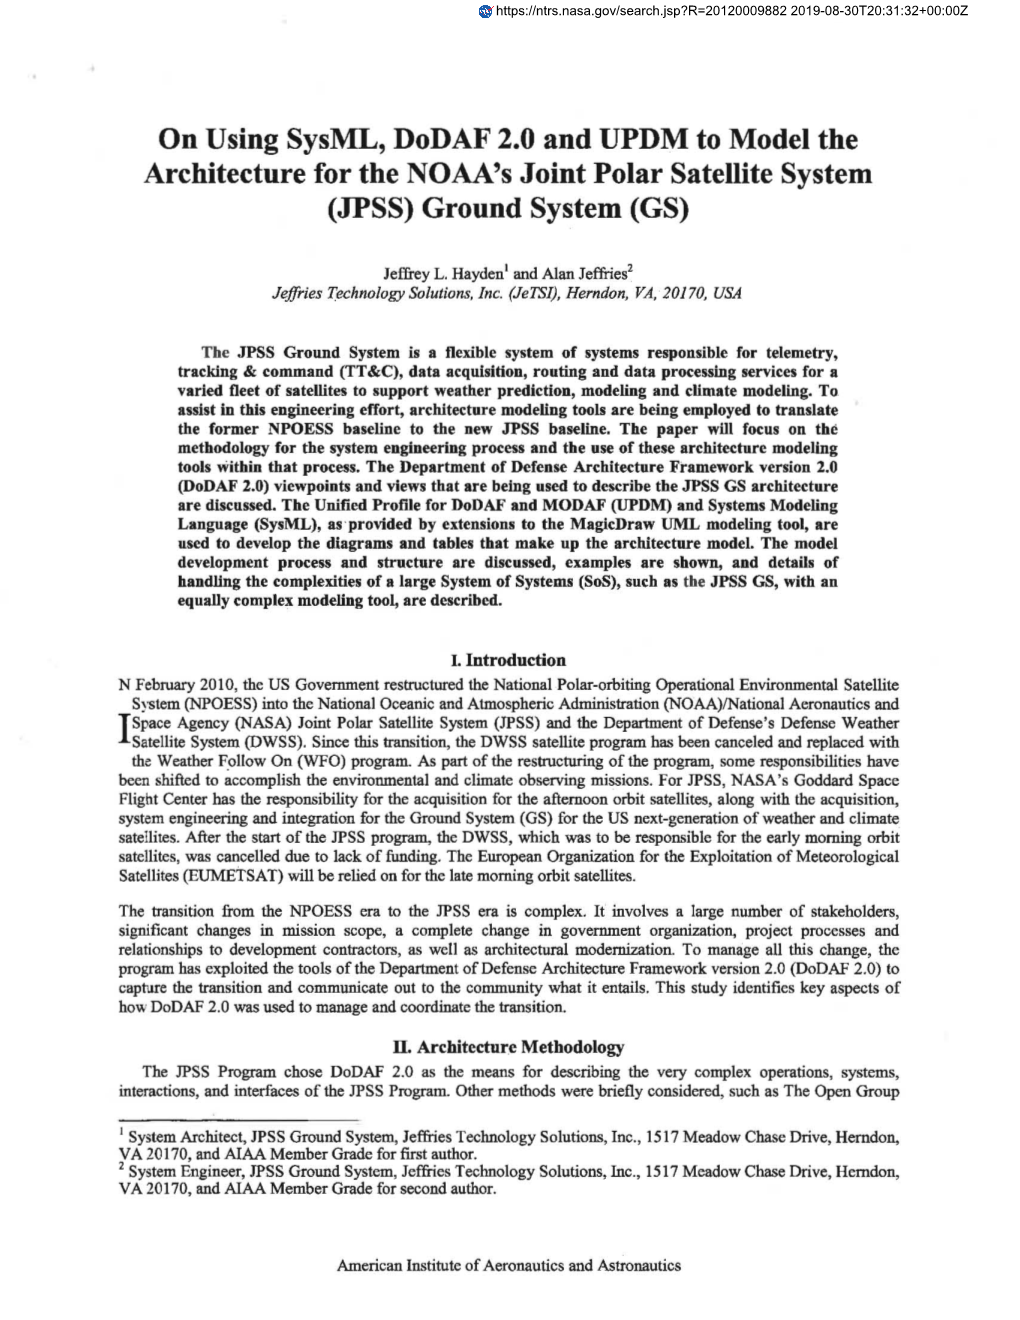 On Using Sysml, Dodaf 2.0 and UPDM to Model the Architecture for the NOAA's Joint Polar Satellite System (JPSS) Ground System (GS)